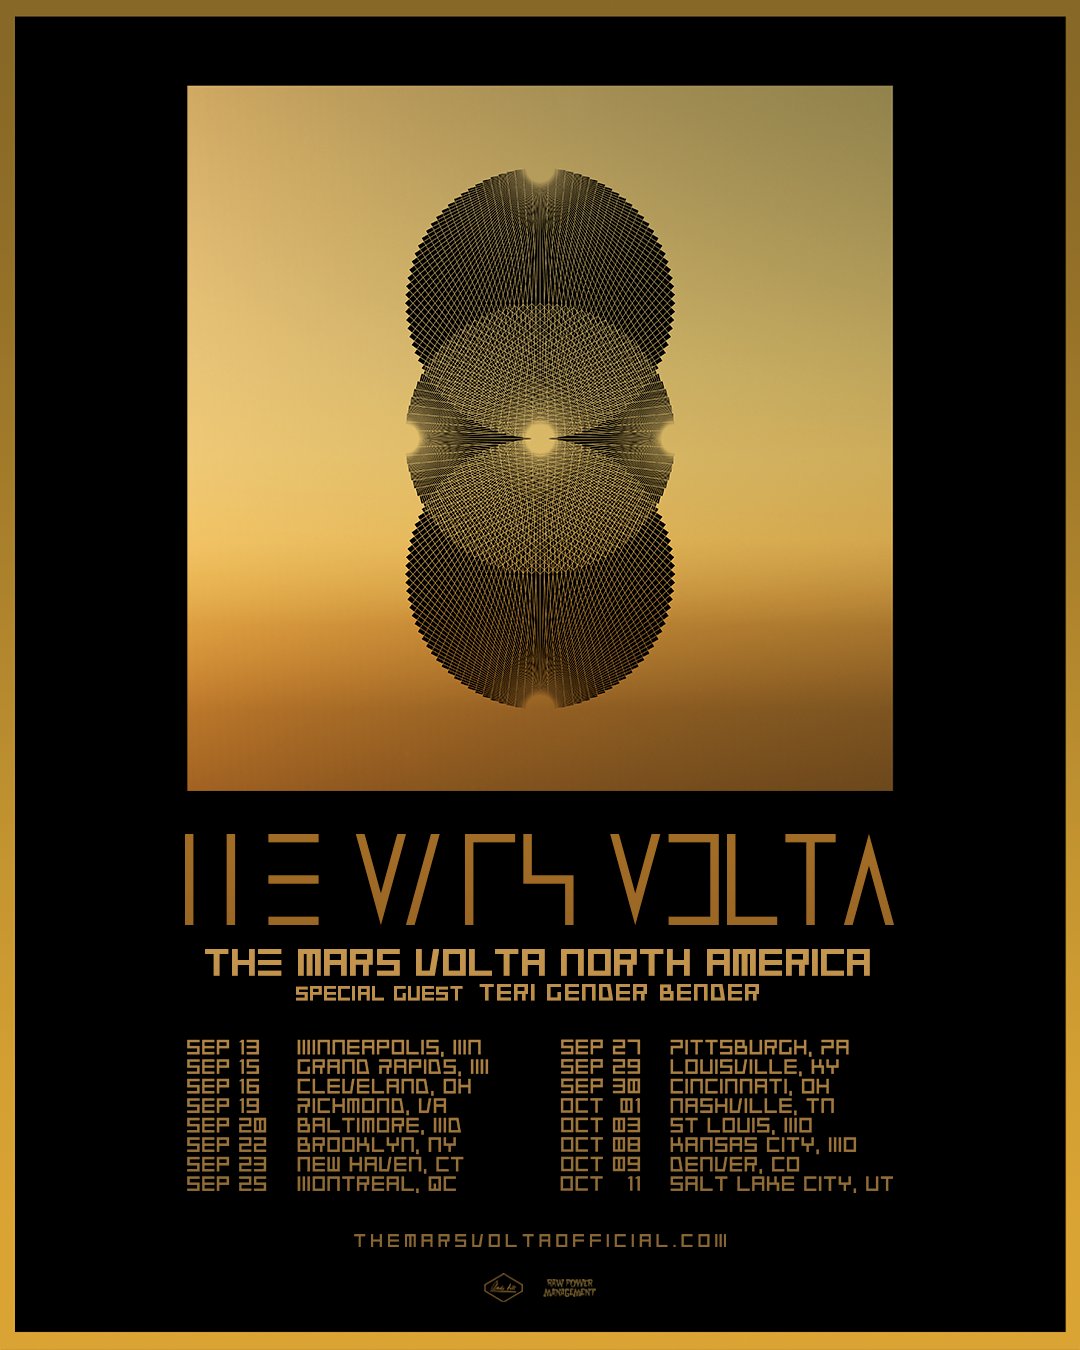 The Mars Volta new tour dates for this year